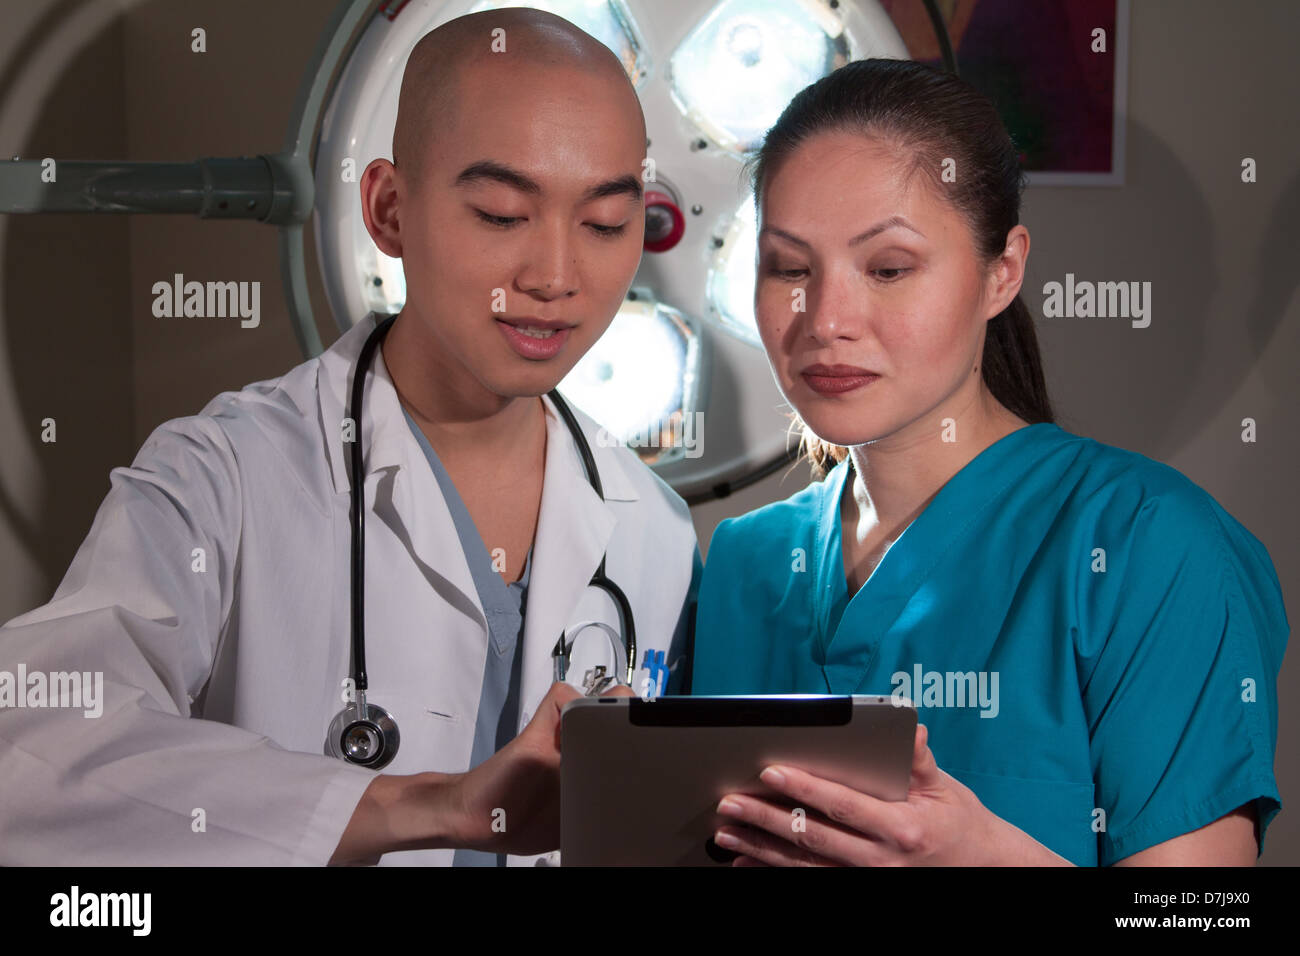 Health care professionals reviewing information on tablet Stock Photo